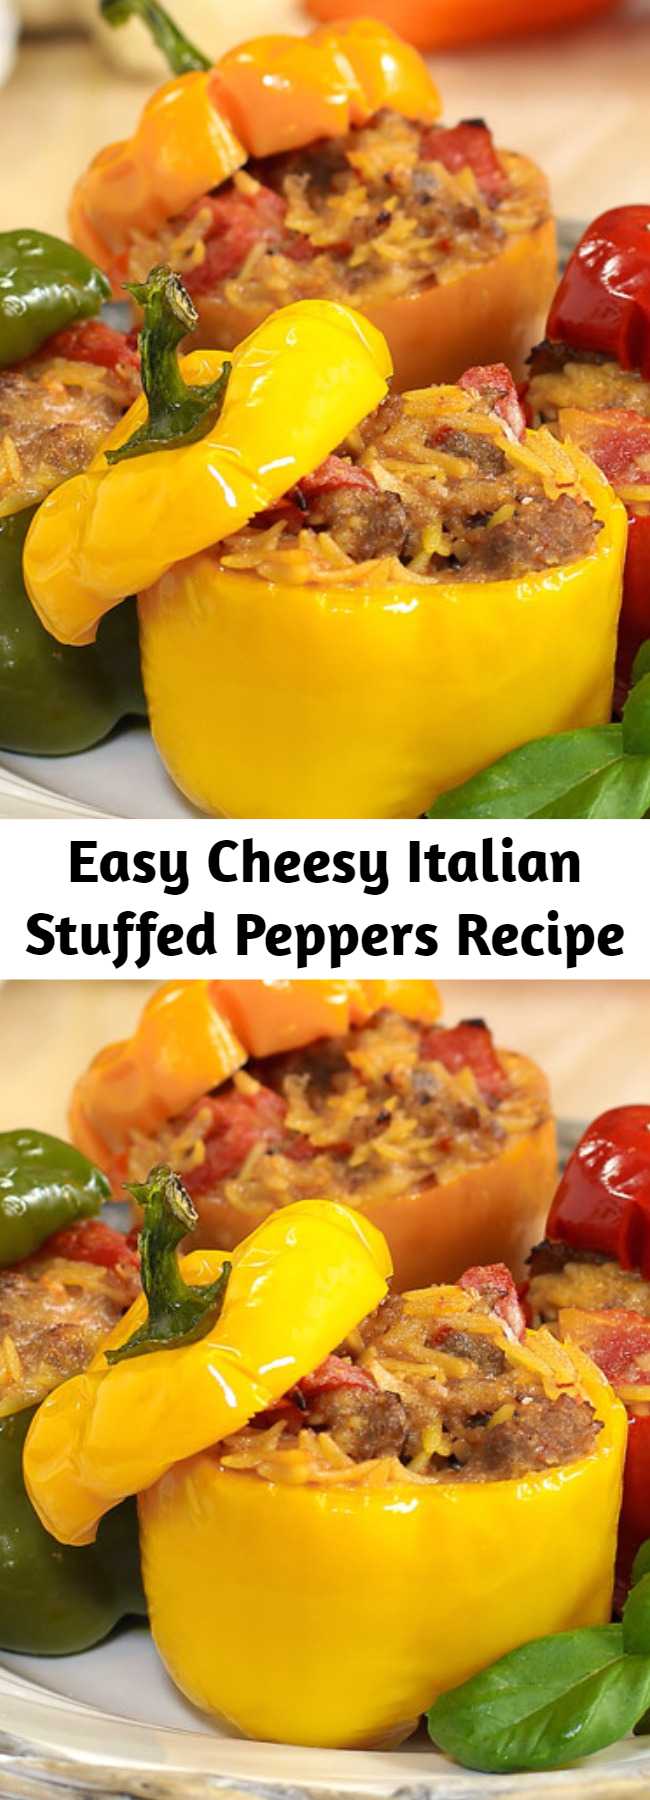 Easy Cheesy Italian Stuffed Peppers Recipe - Cheesy Italian Stuffed Peppers start with cheesy Italian sausage, fire-roasted tomatoes, and orzo pasta. It only gets better from there. An easy recipe that goes from prep to plate in 30 minutes makes this one a keeper! #stuffedpeppers #30minutemeals